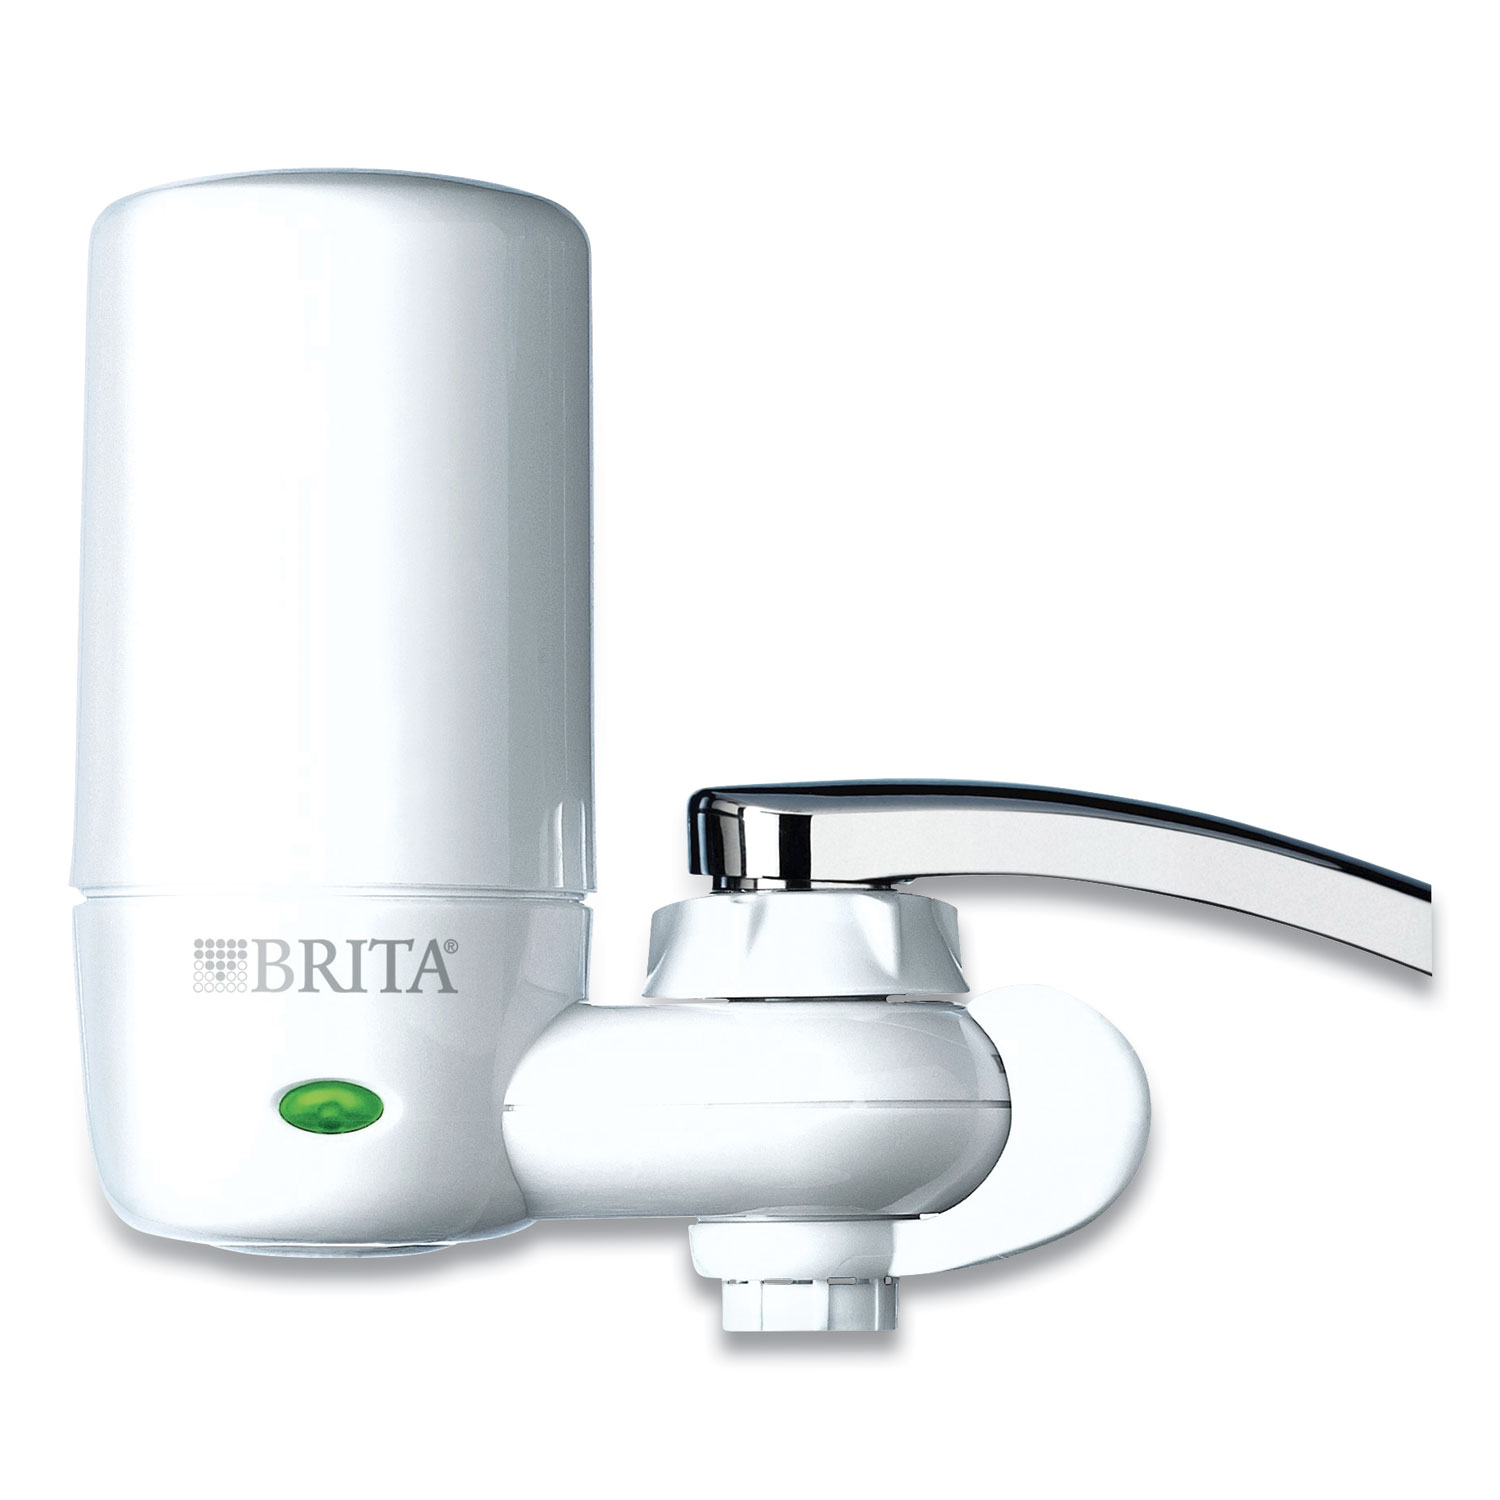  Brita 42201 On Tap Faucet Water Filter System, White (CLO42201) 